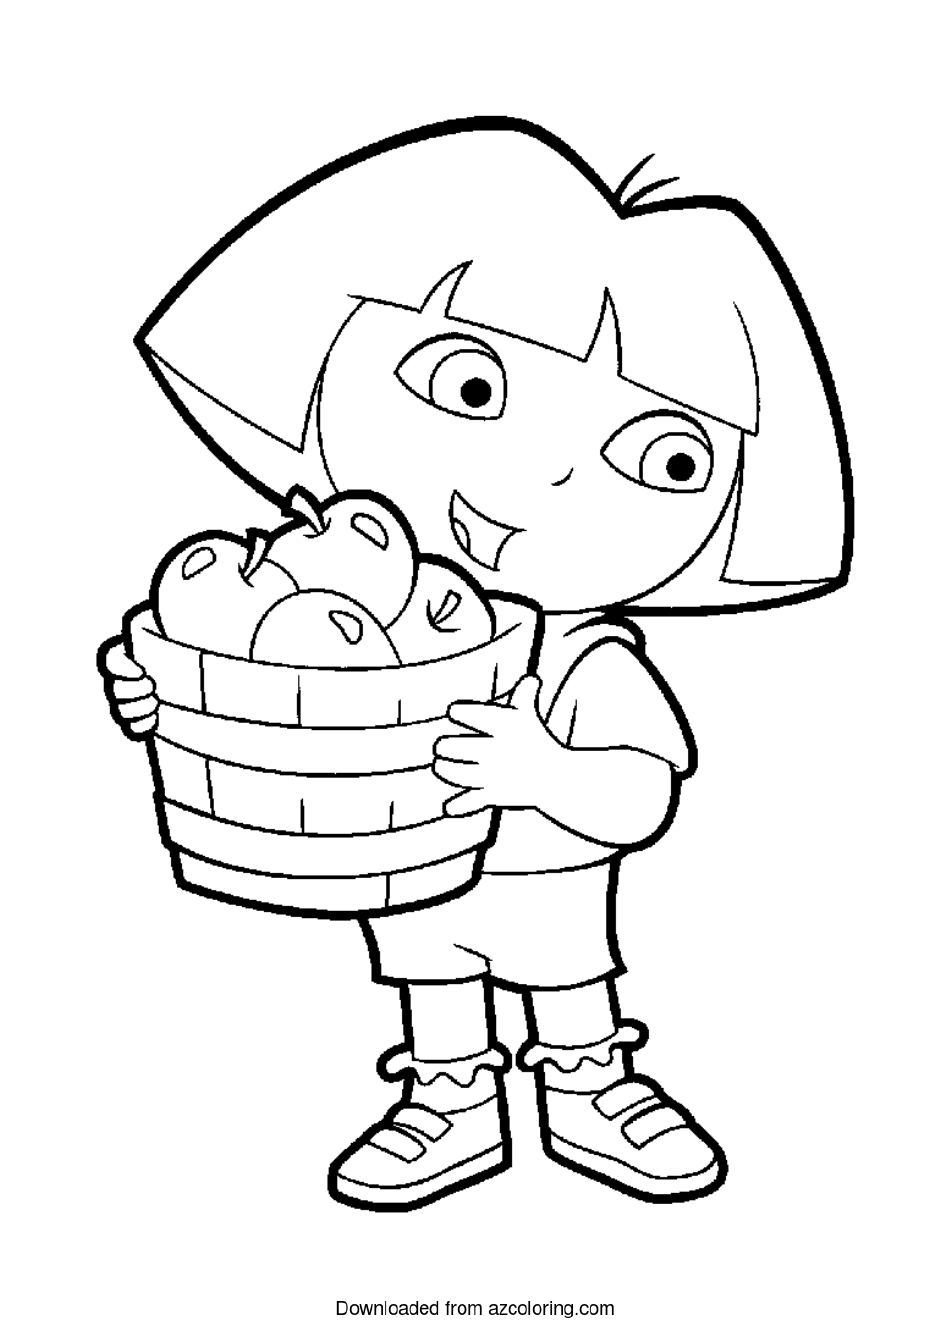 Dora With Apples Coloring Page - Printable Cartoon Character Coloring Sheet Dependable loveable Dora showcasing her delicious creation of apples on a coloring page.